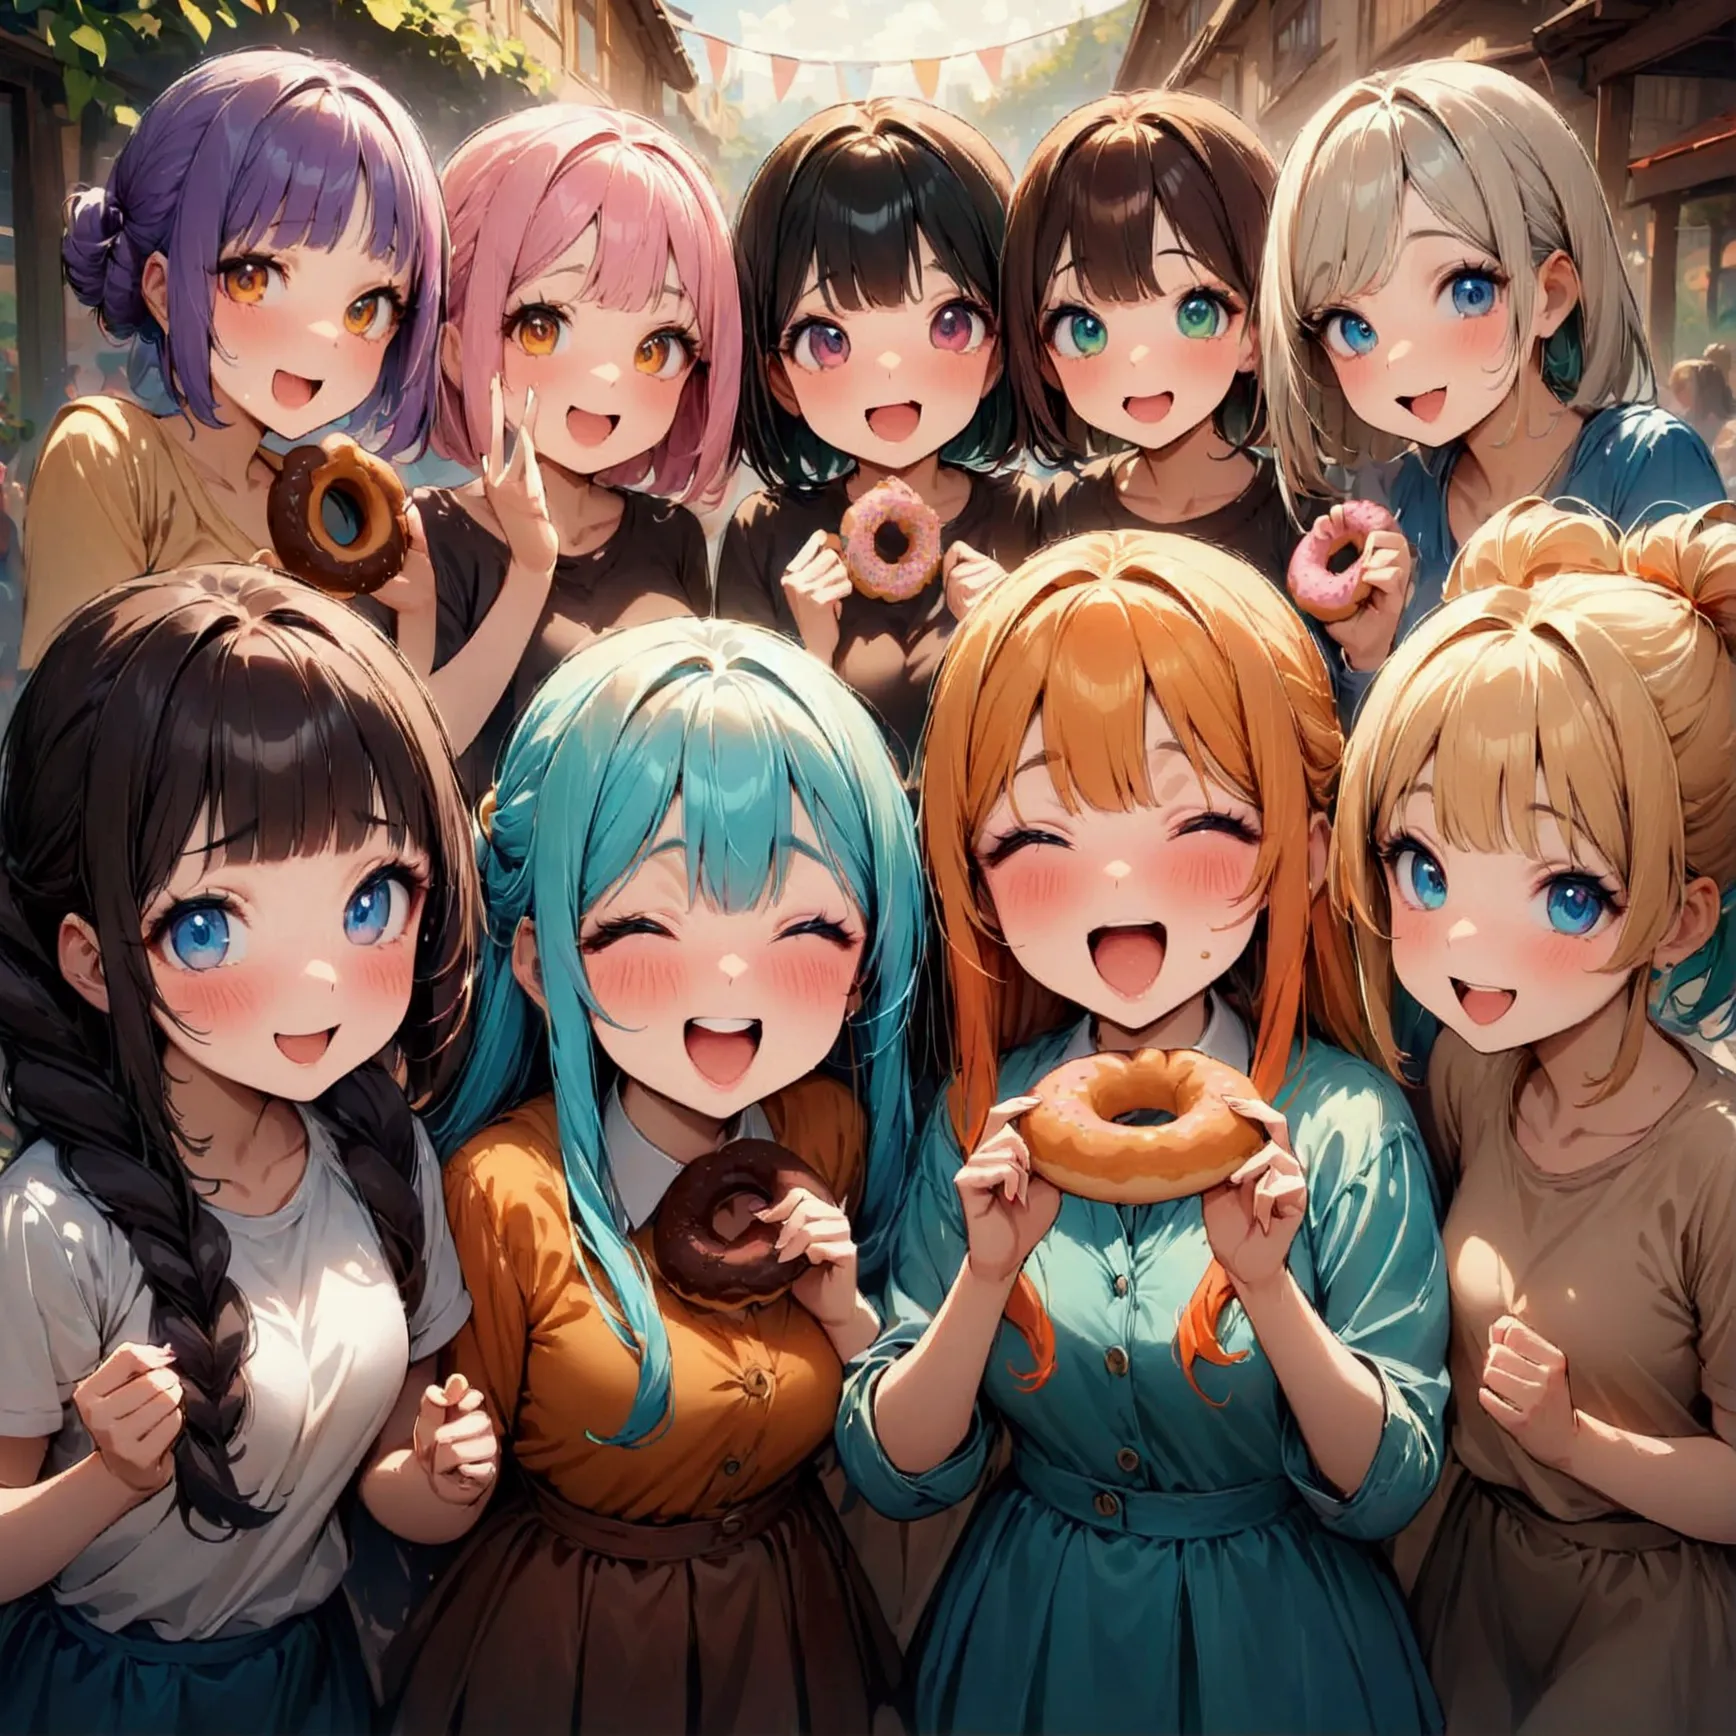 ((super giant doughnut)), (girls eating donuts), multiple girls, group picture, lineup, 6+girls, colorful hair, various hairstyl...